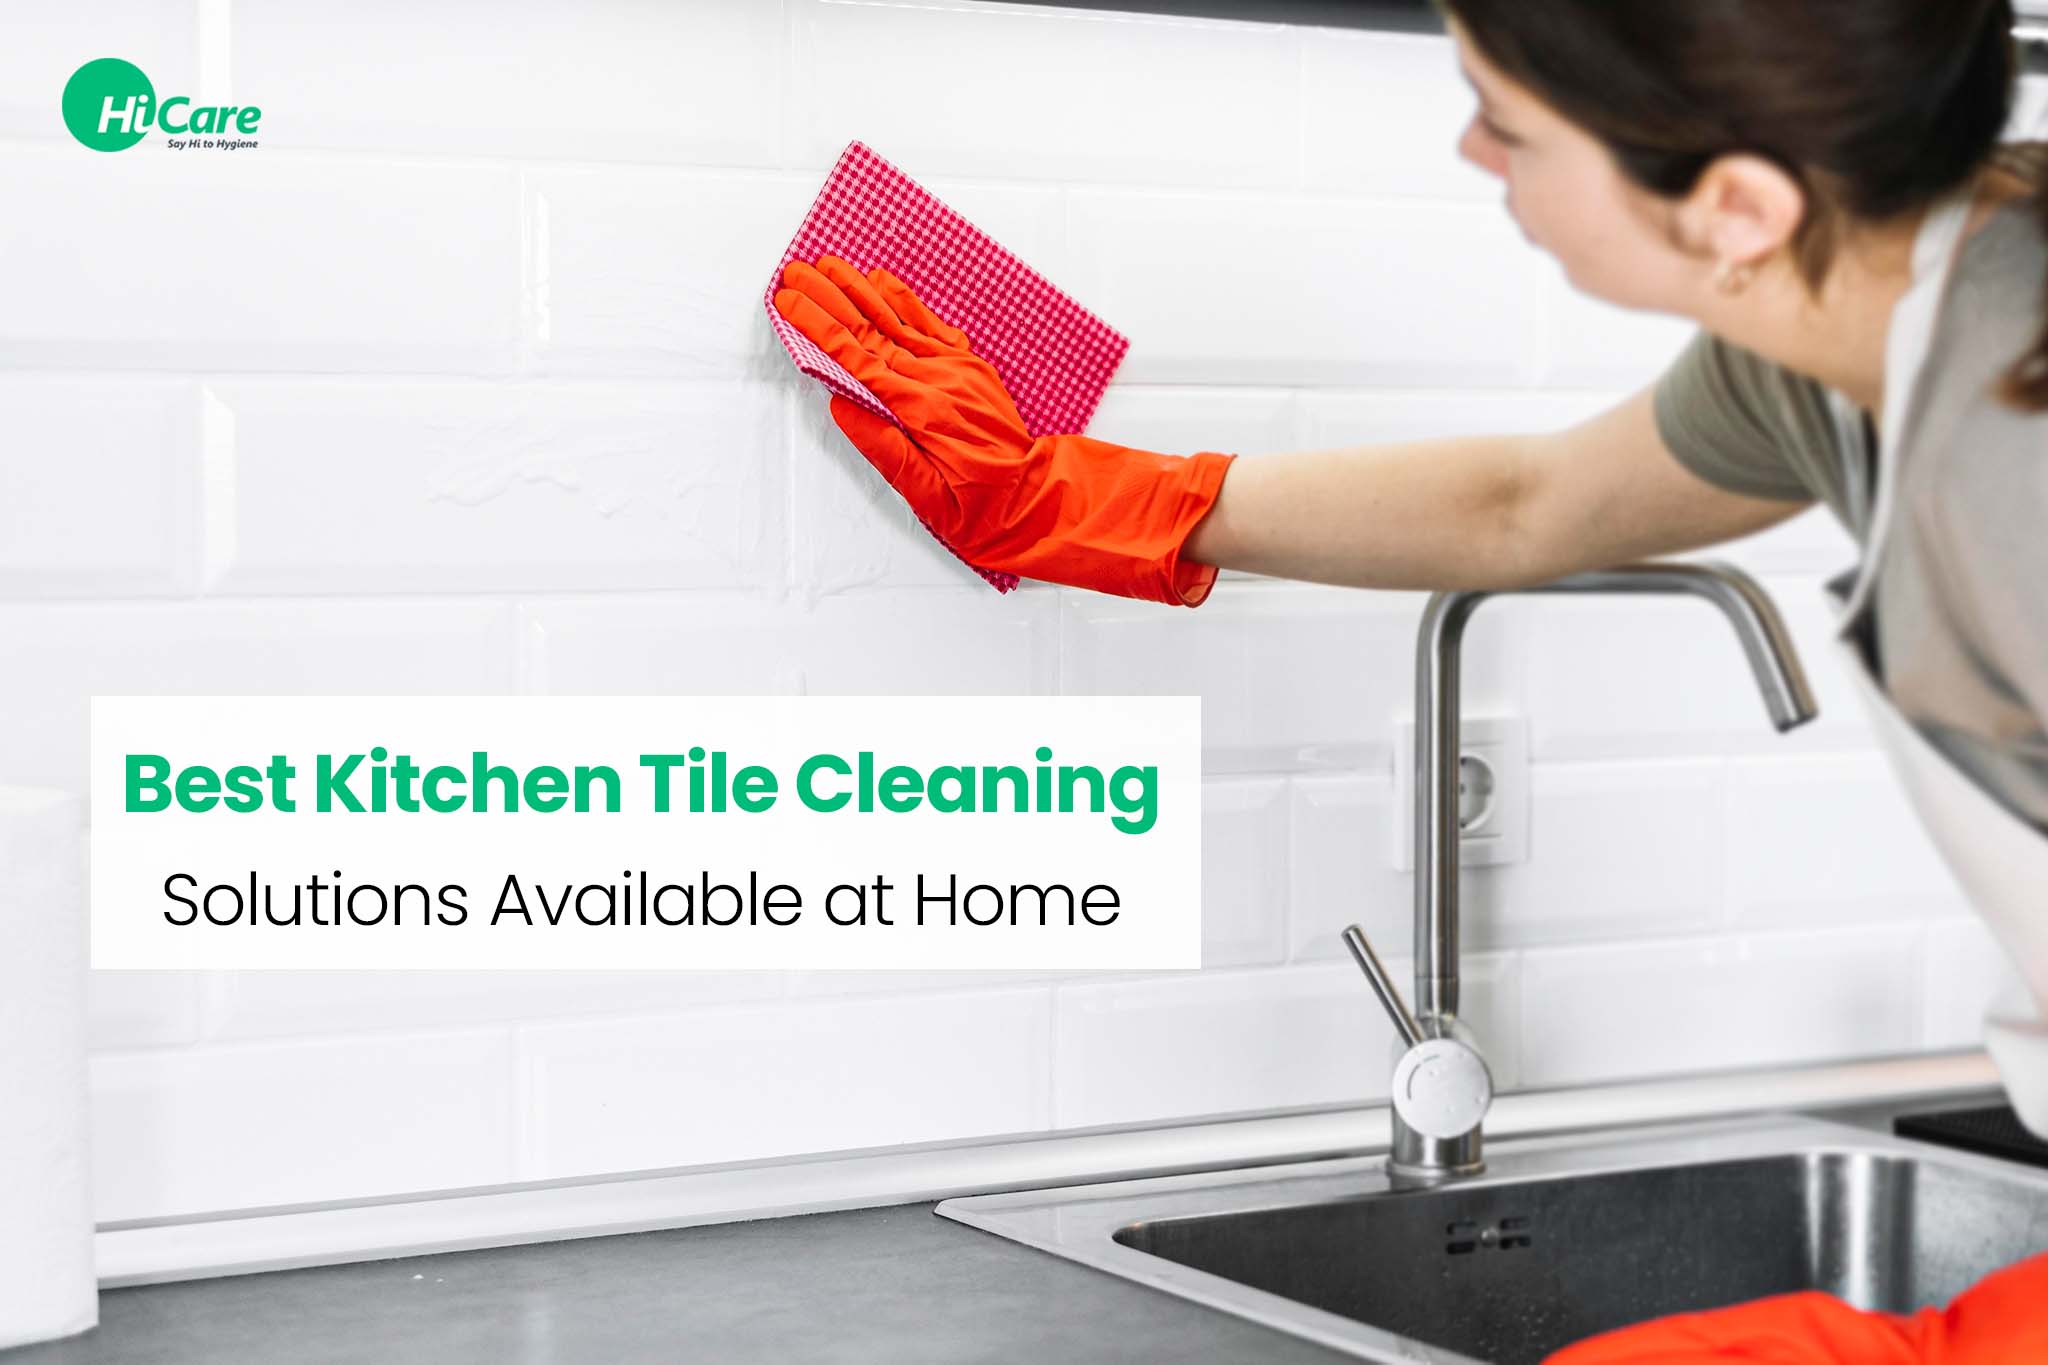 NEW PLACE NEW SANITATION! Steam clean your tile & watch what comes